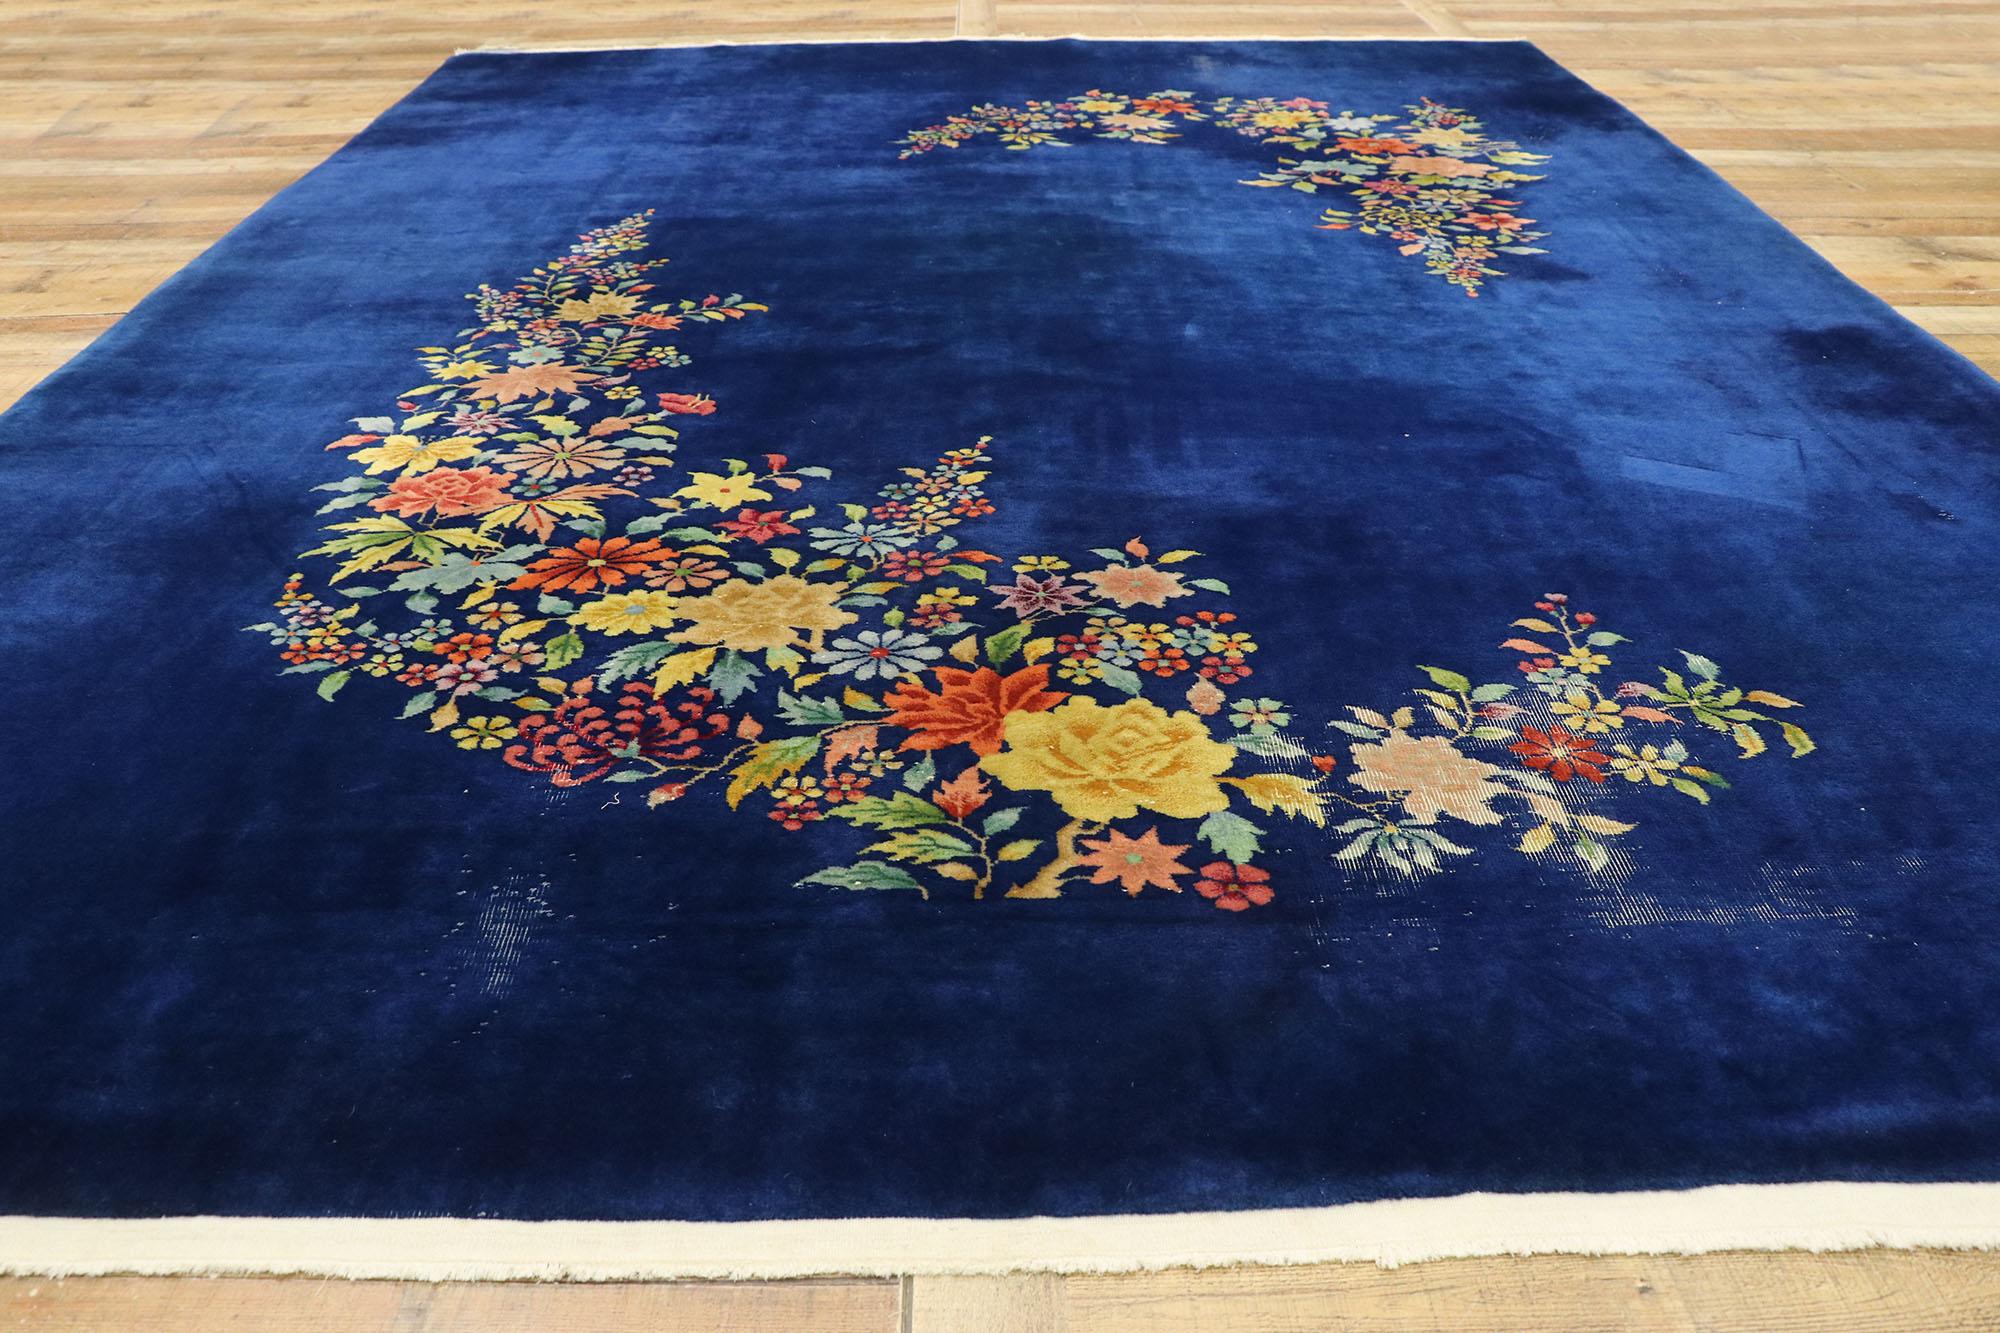 Wool Antique Chinese Art Deco Rug with Jazz Age Style Inspired by Walter Nichols